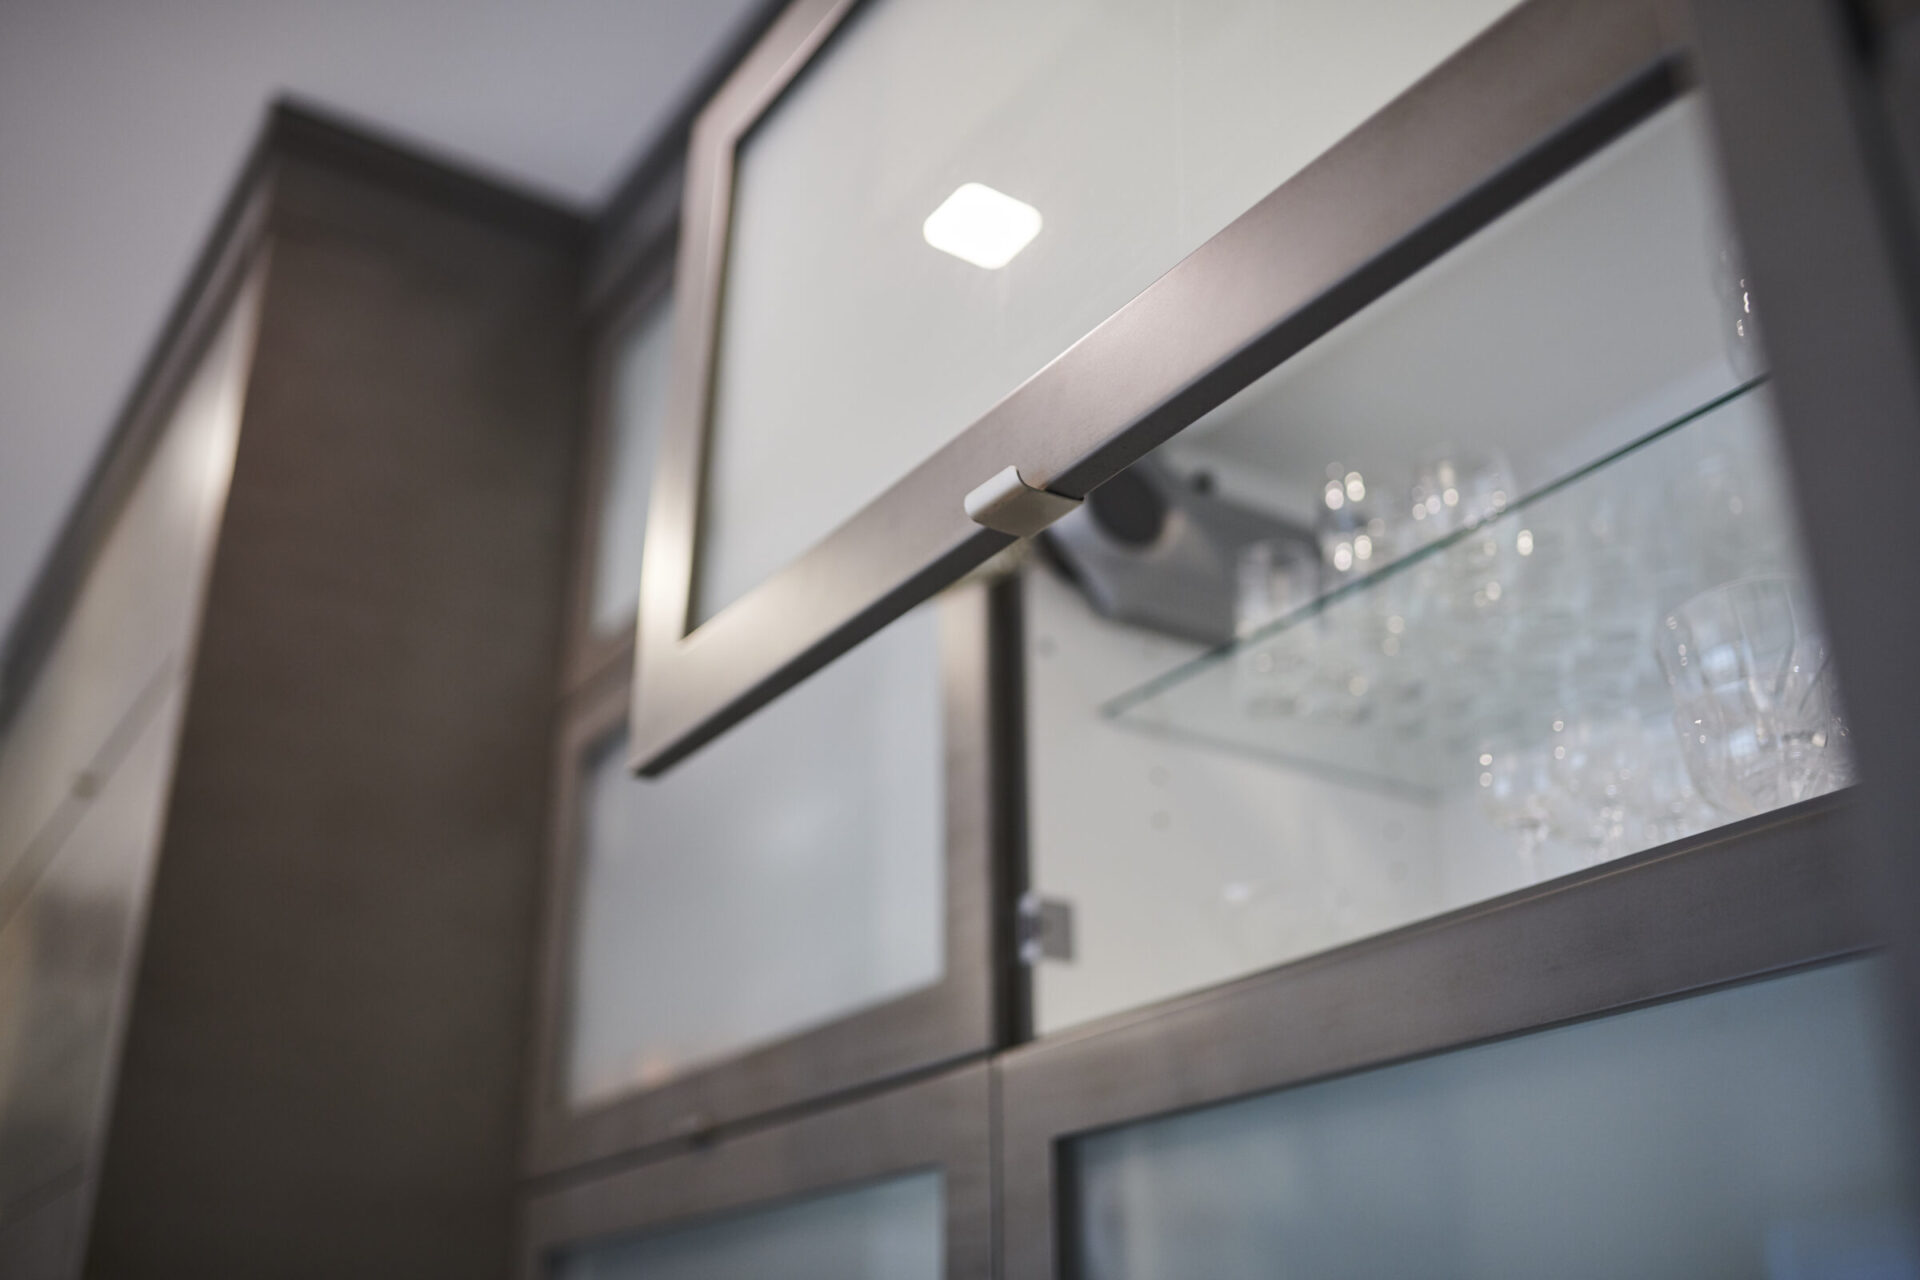 A close-up view of a modern kitchen cabinet with frosted glass doors, highlighting the sleek metal handle with wine glasses visible inside.